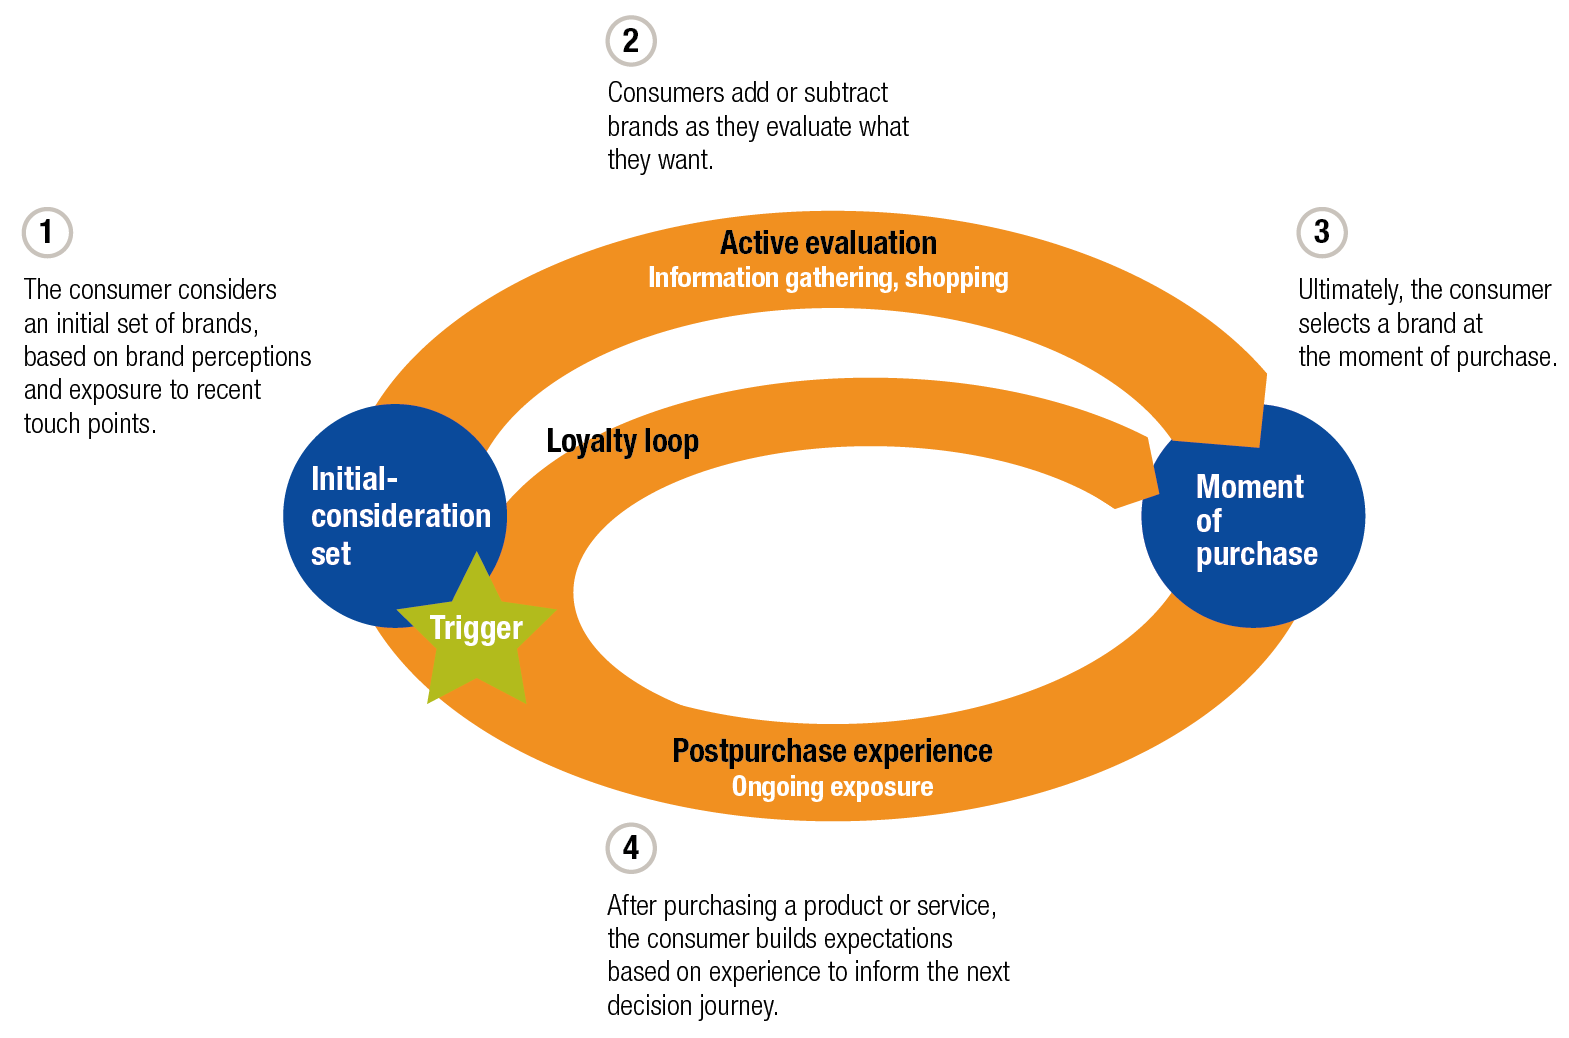 consumer journey as a loop